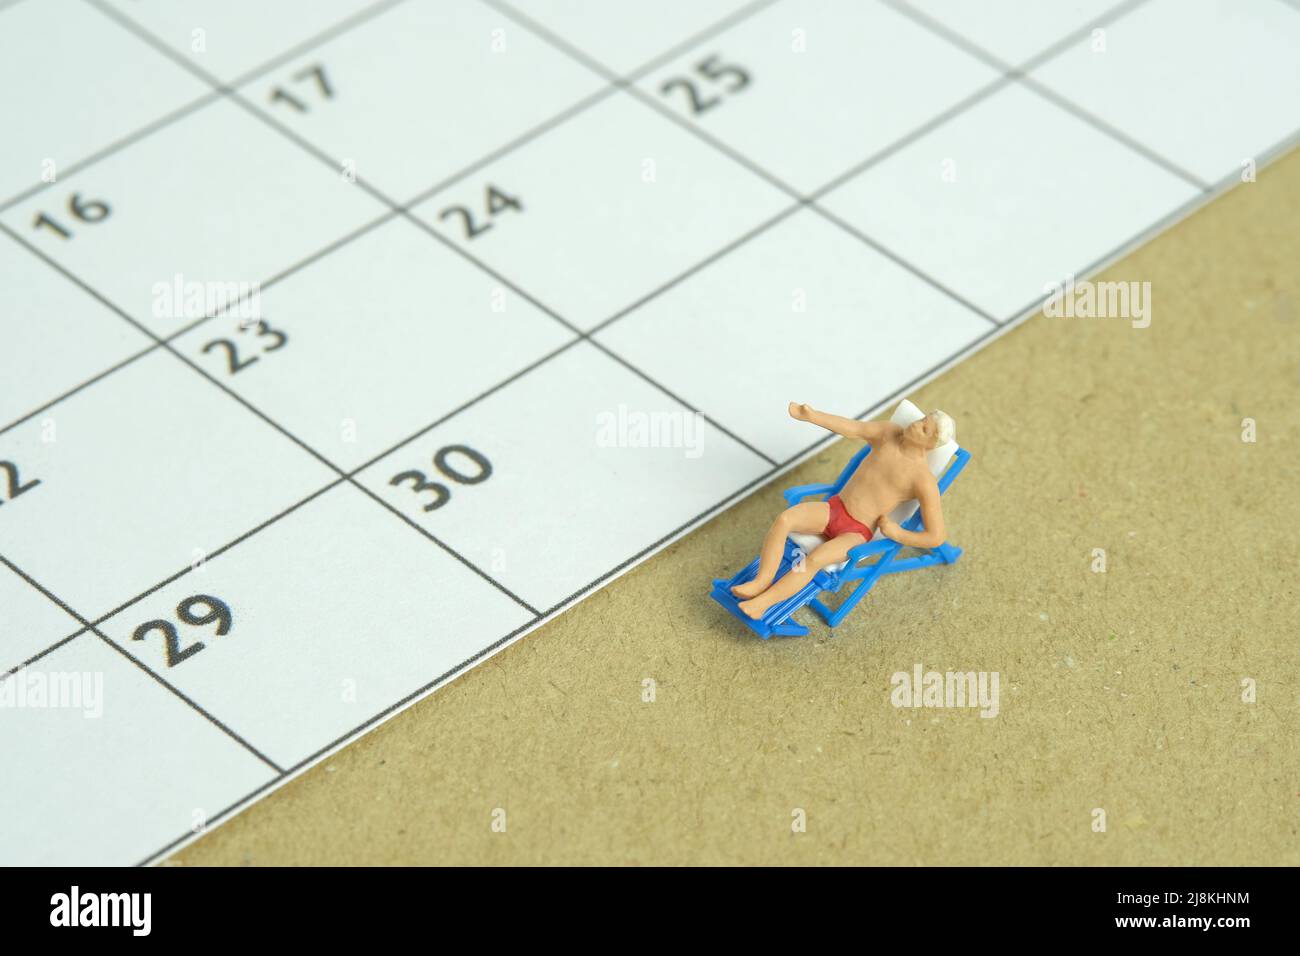 Miniature people toy figure photography. Travel plan schedule concept, men relaxing at beach chair with calendar. Image photo Stock Photo